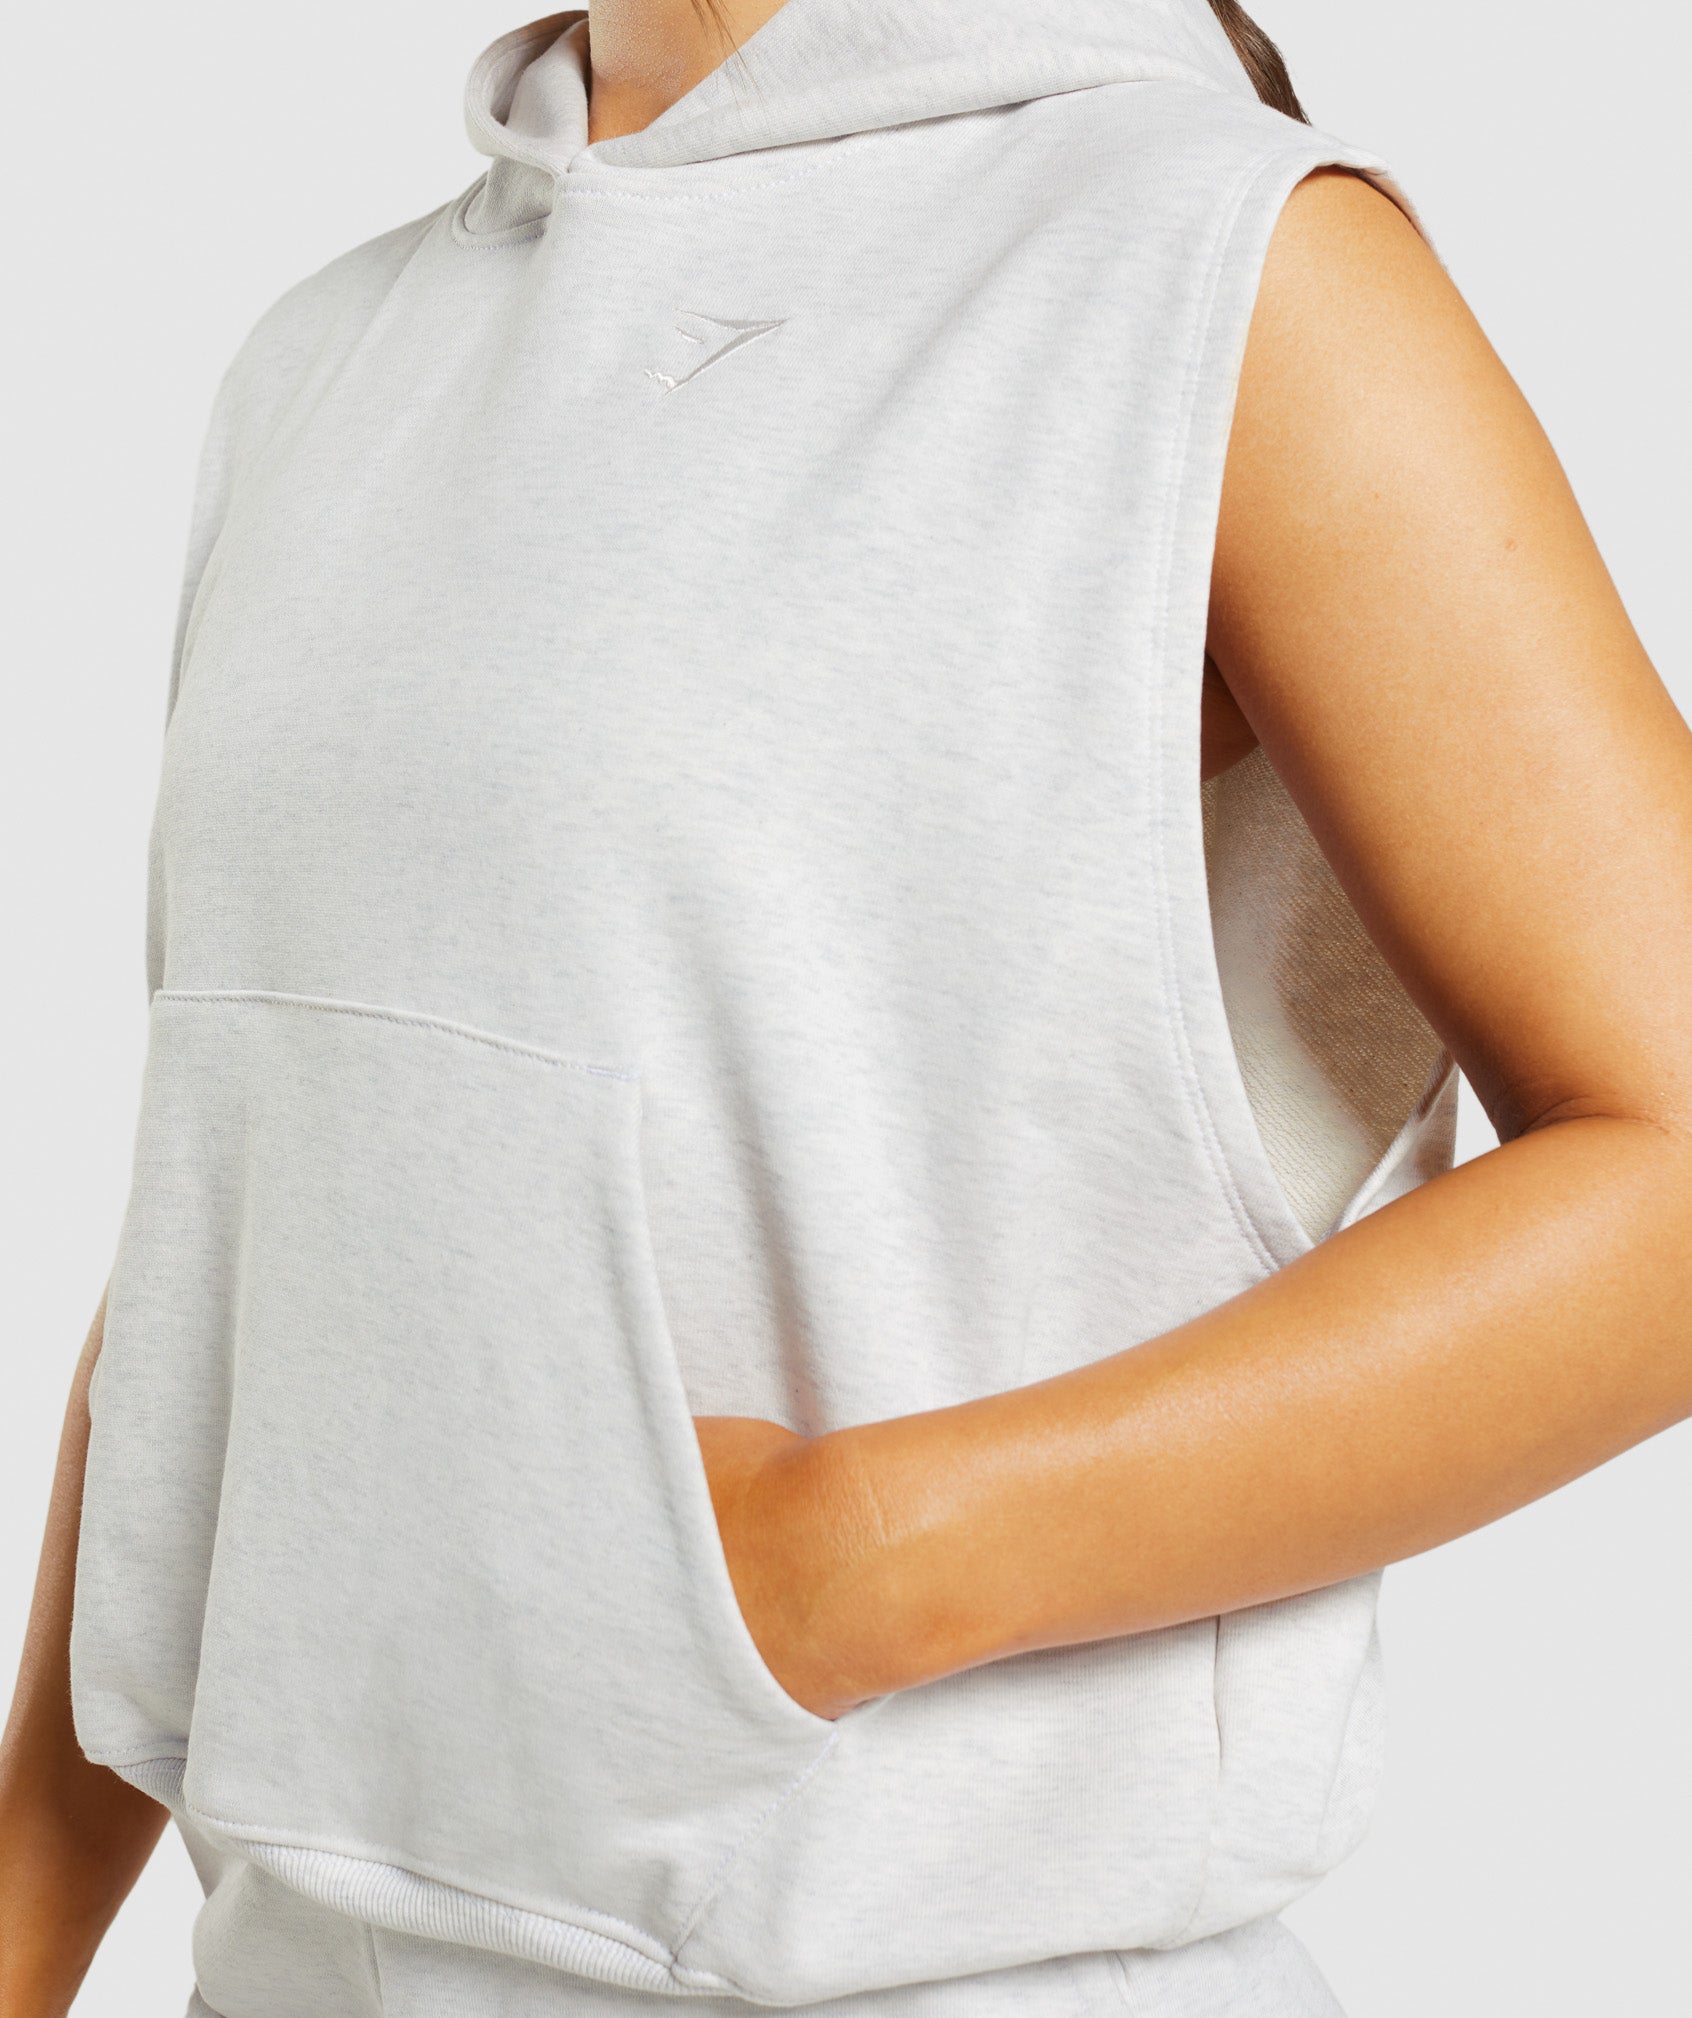 Rest Day Sweats Sleeveless Hoodie in Cloud Marl - view 5